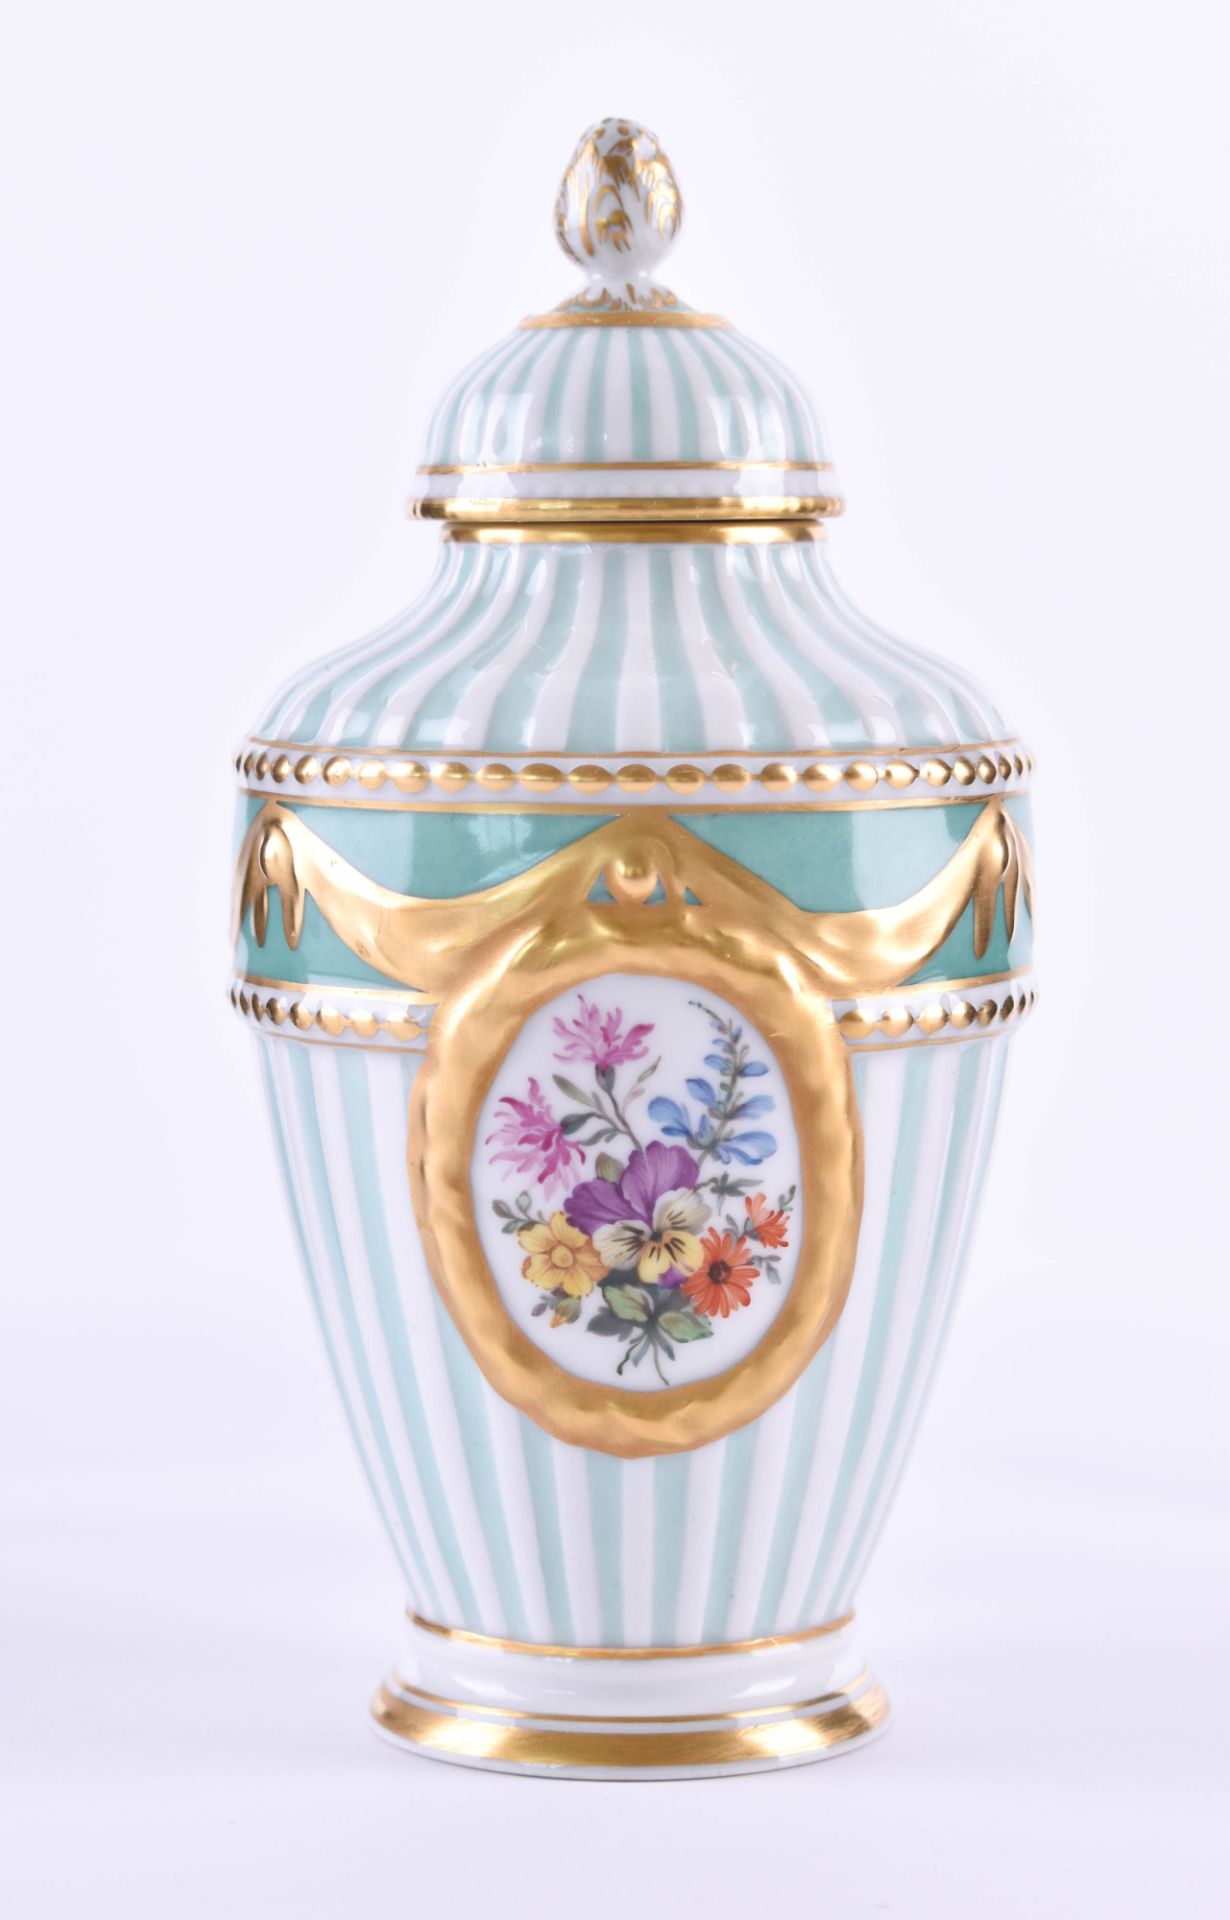 Lid vase KPMlidded vase in Empire style, in the reserves with German flower bouquet, in the